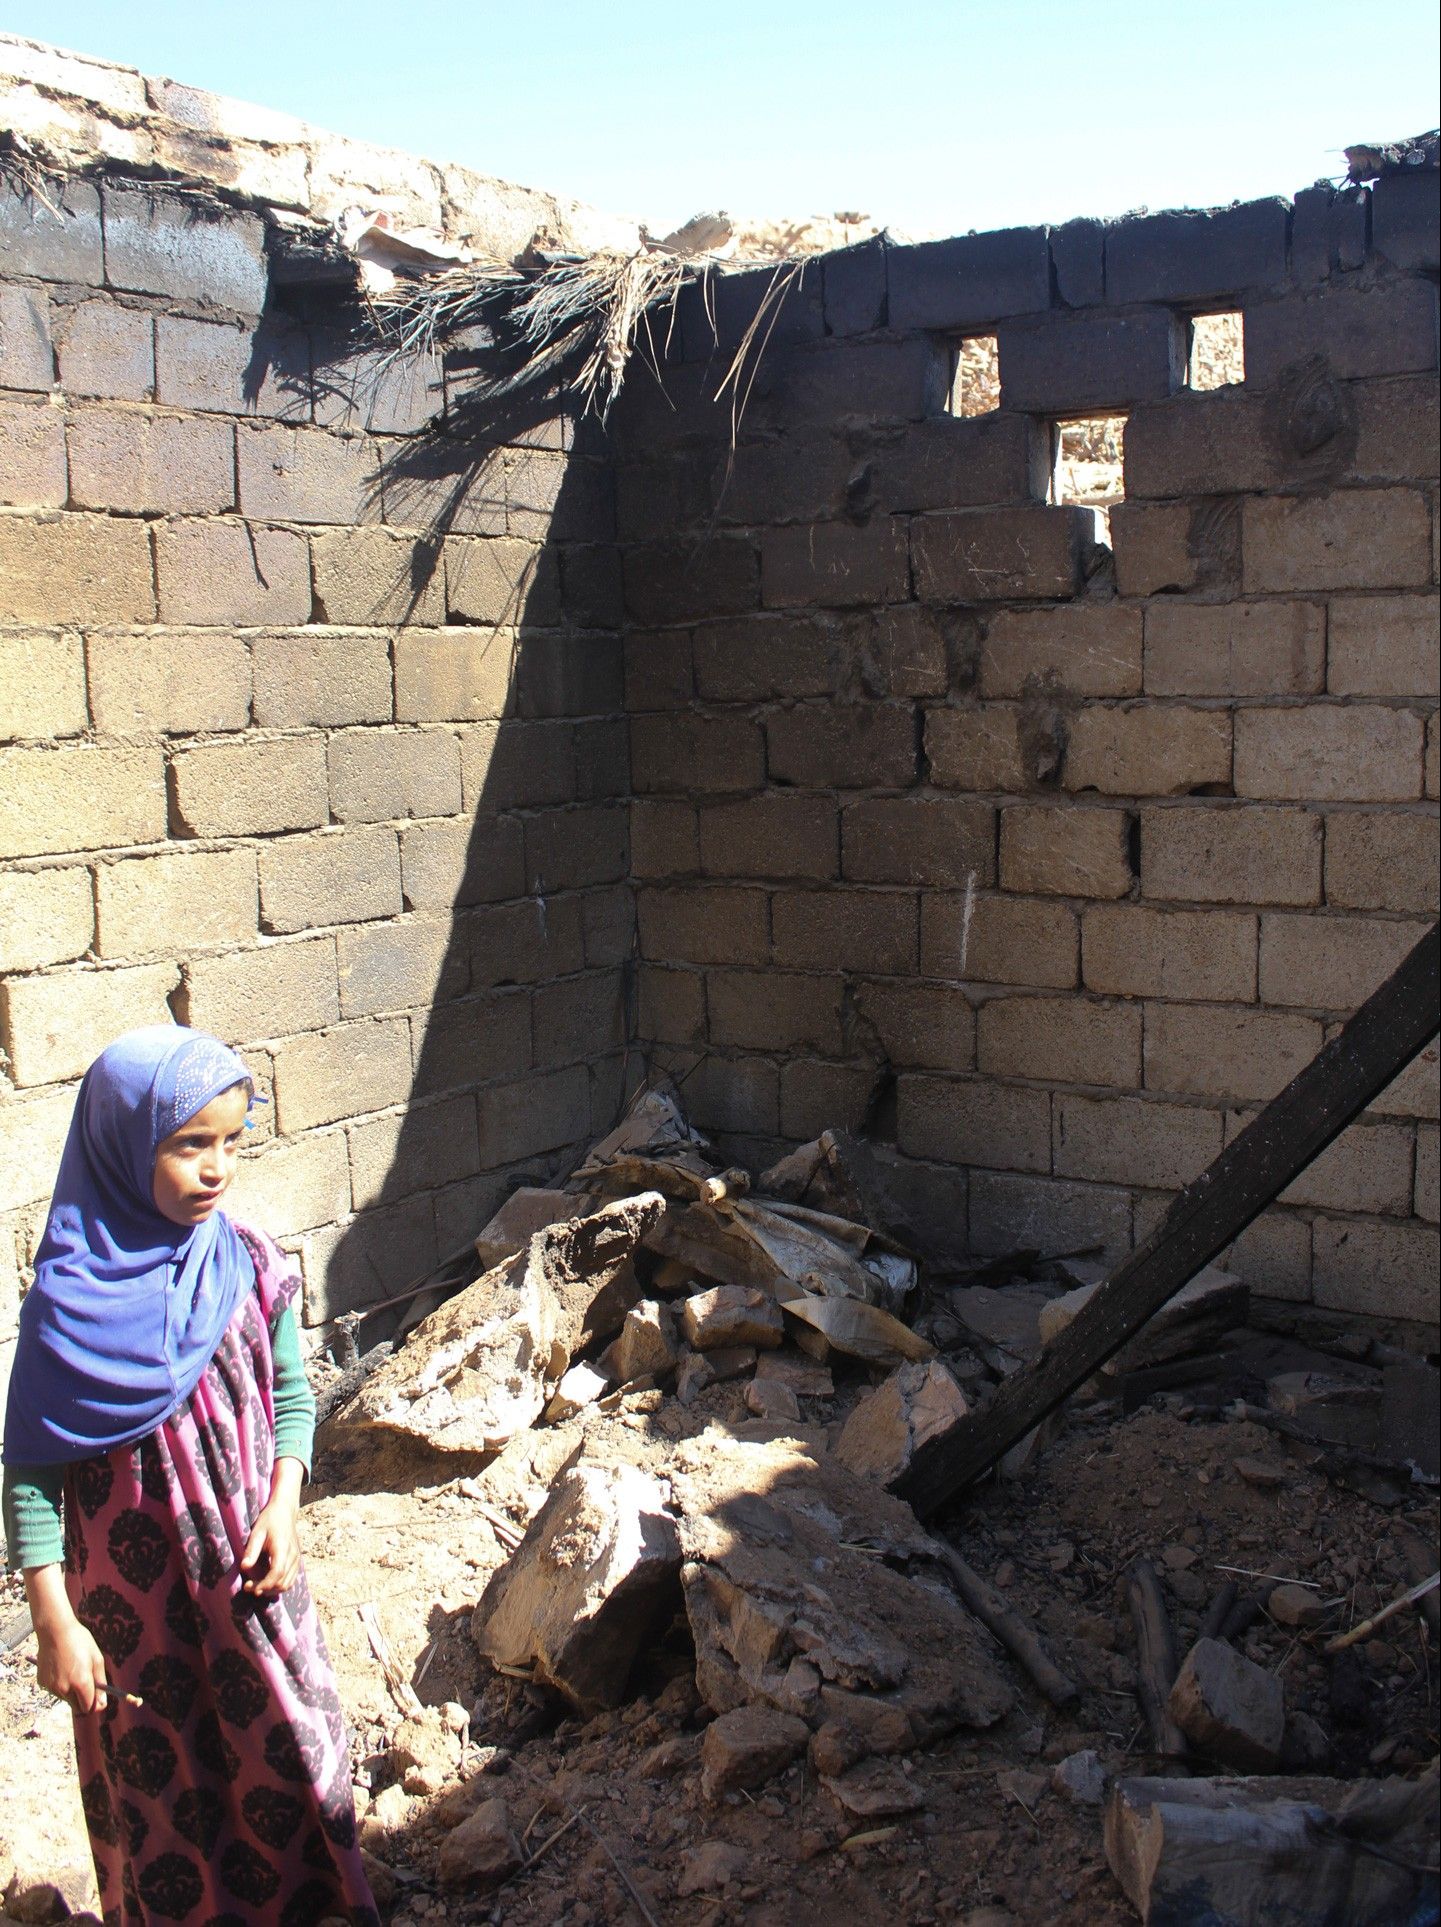 A girl stands in the burnt-out remains of a house destroyed during the U.S. Navy SEAL raid in the village of al Ghayil on January 29. Image by Iona Craig. Yemen, 2017.